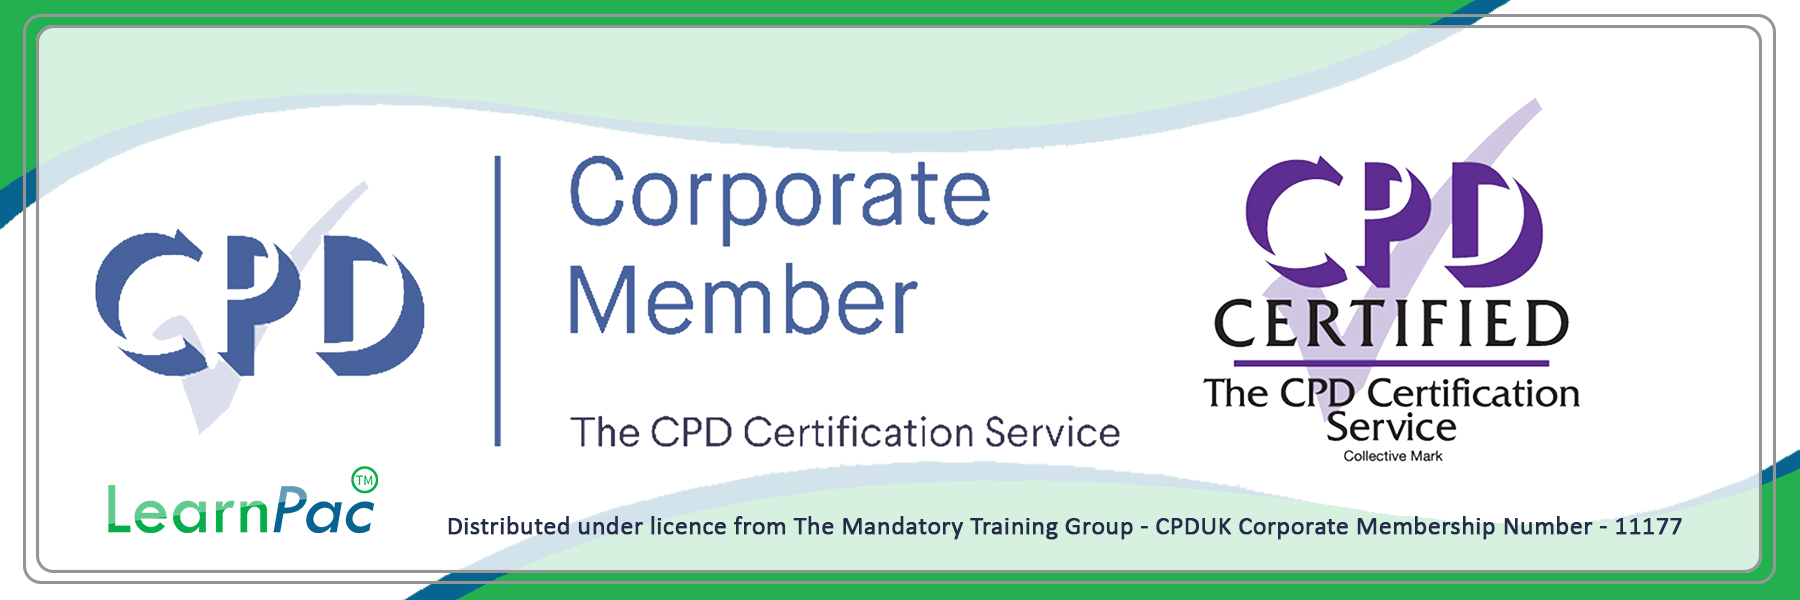 Documentation and Recordkeeping - E-Learning Courses with Certificates - CPD Certified - LearnPac Systems UK -